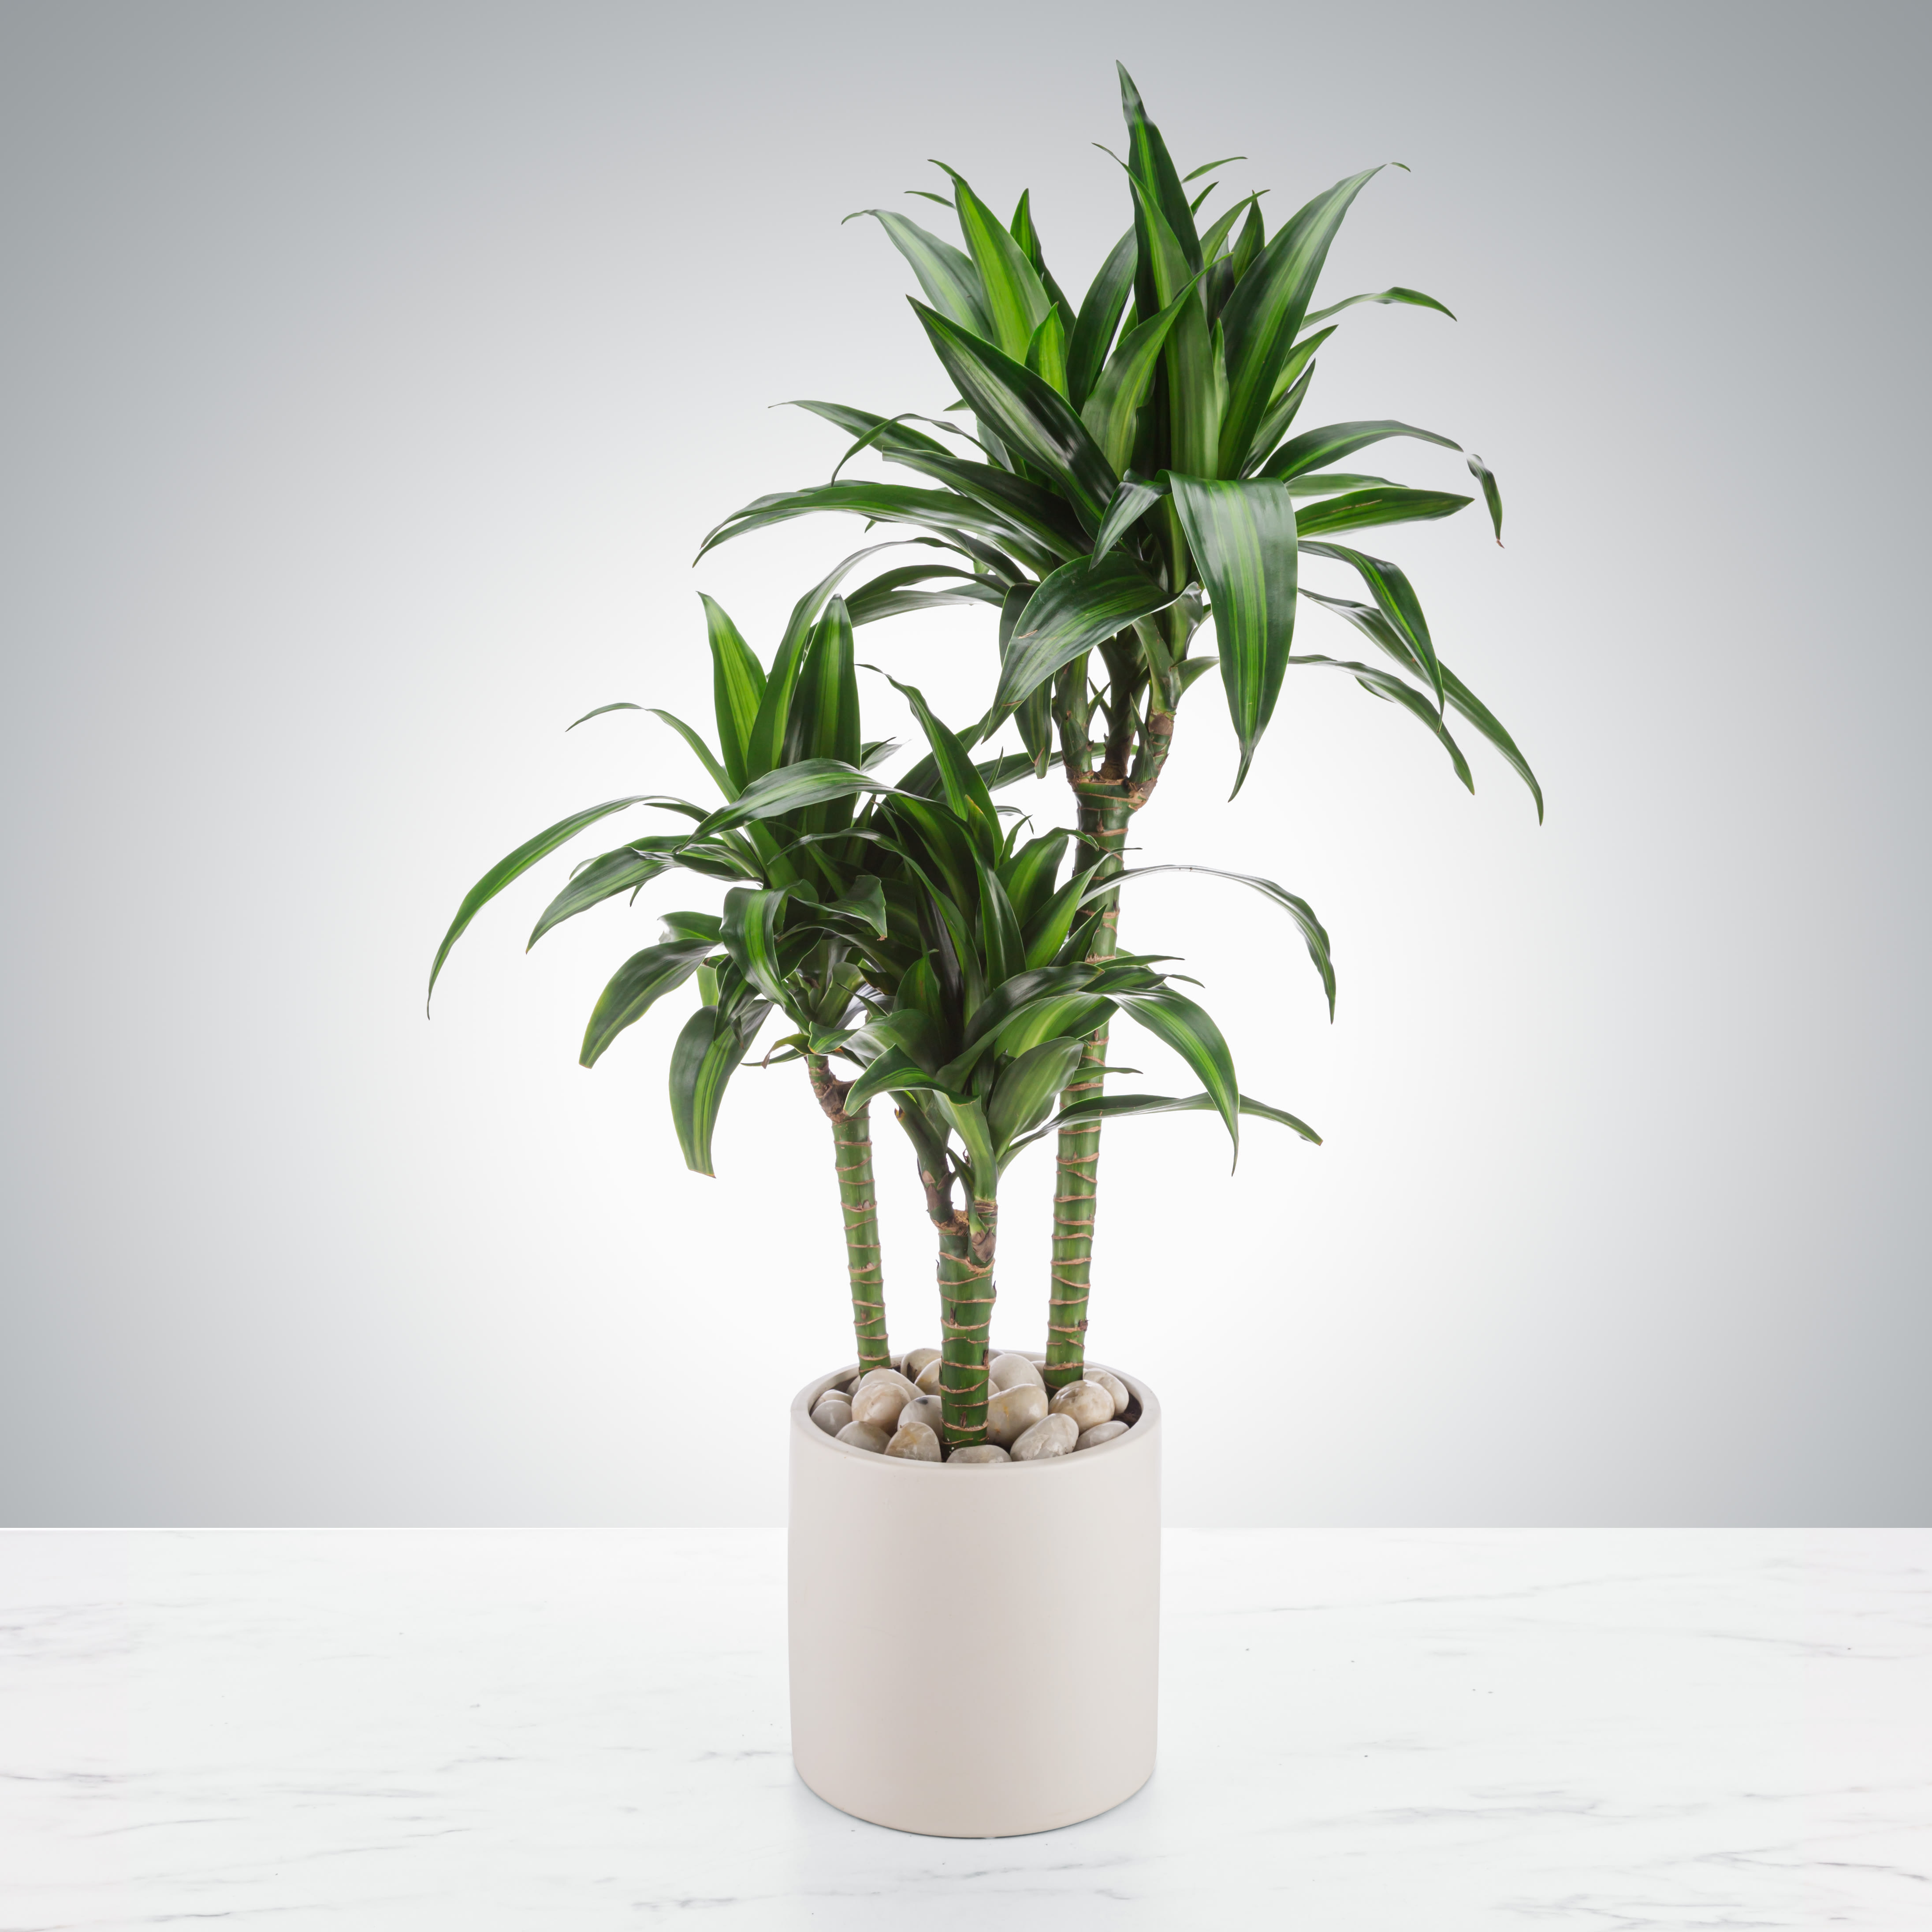 Madagascar dragon tree (Tall Dracaena) - Dracaena Fragrans or corn plants can handle a variety of different types of light and can be mistaken for little trees. They do an excellent job filtering the air and make a big statement when sent as a gift.